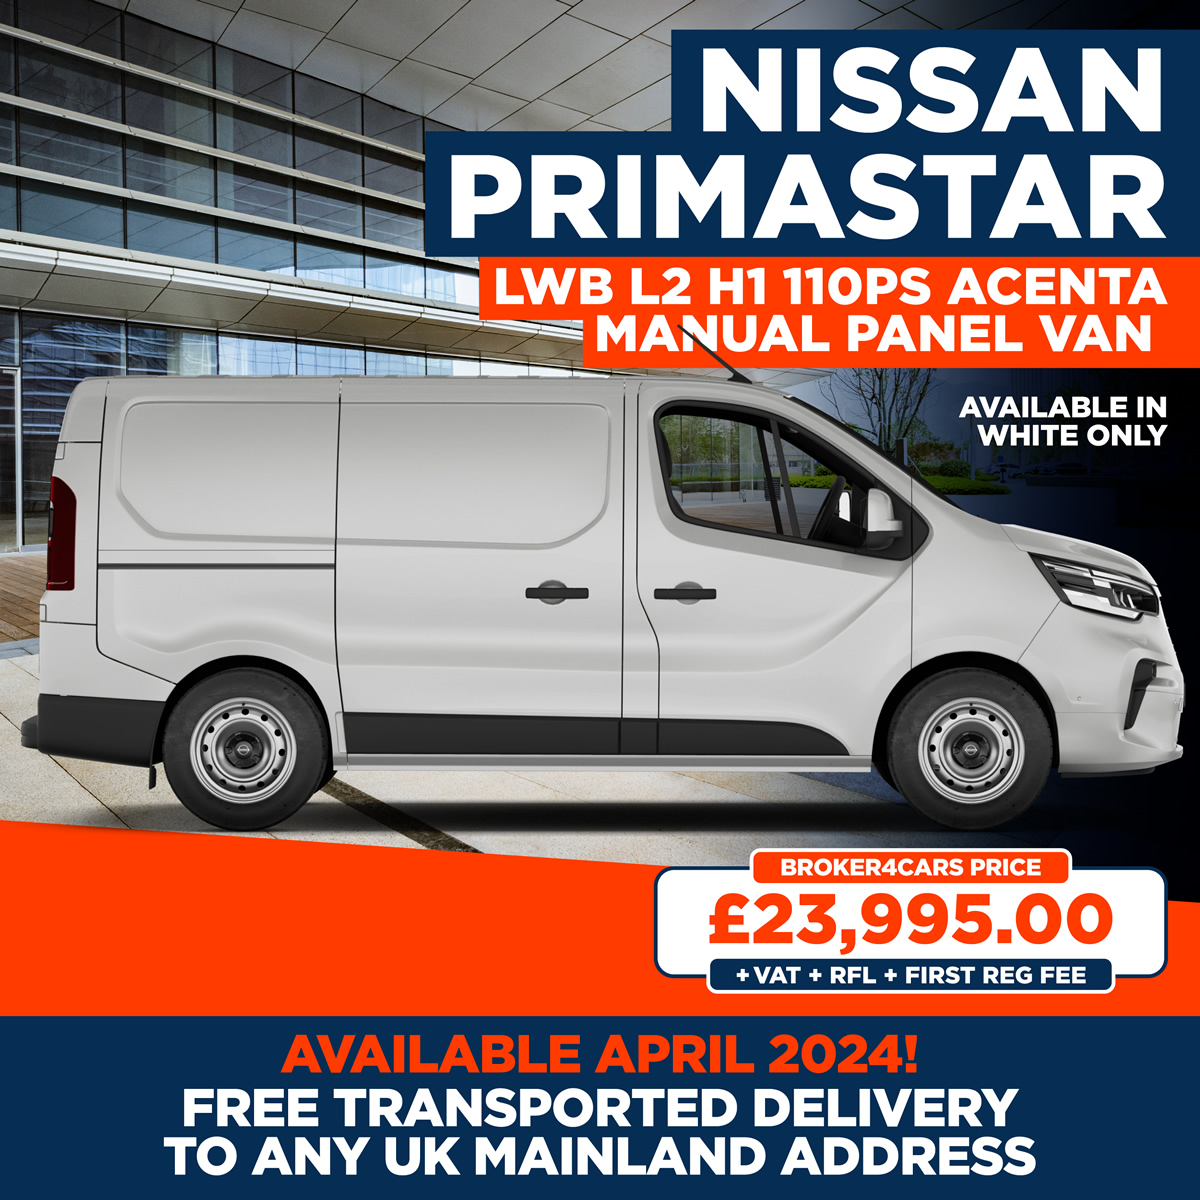 Nissan Primastar LWB L2 H1 110PS Acenta Manual Panel Van. Available April 2024. Free transported delivery to any uk mainland address. Available in white only. Broker4Cars Price £23,995 OTR